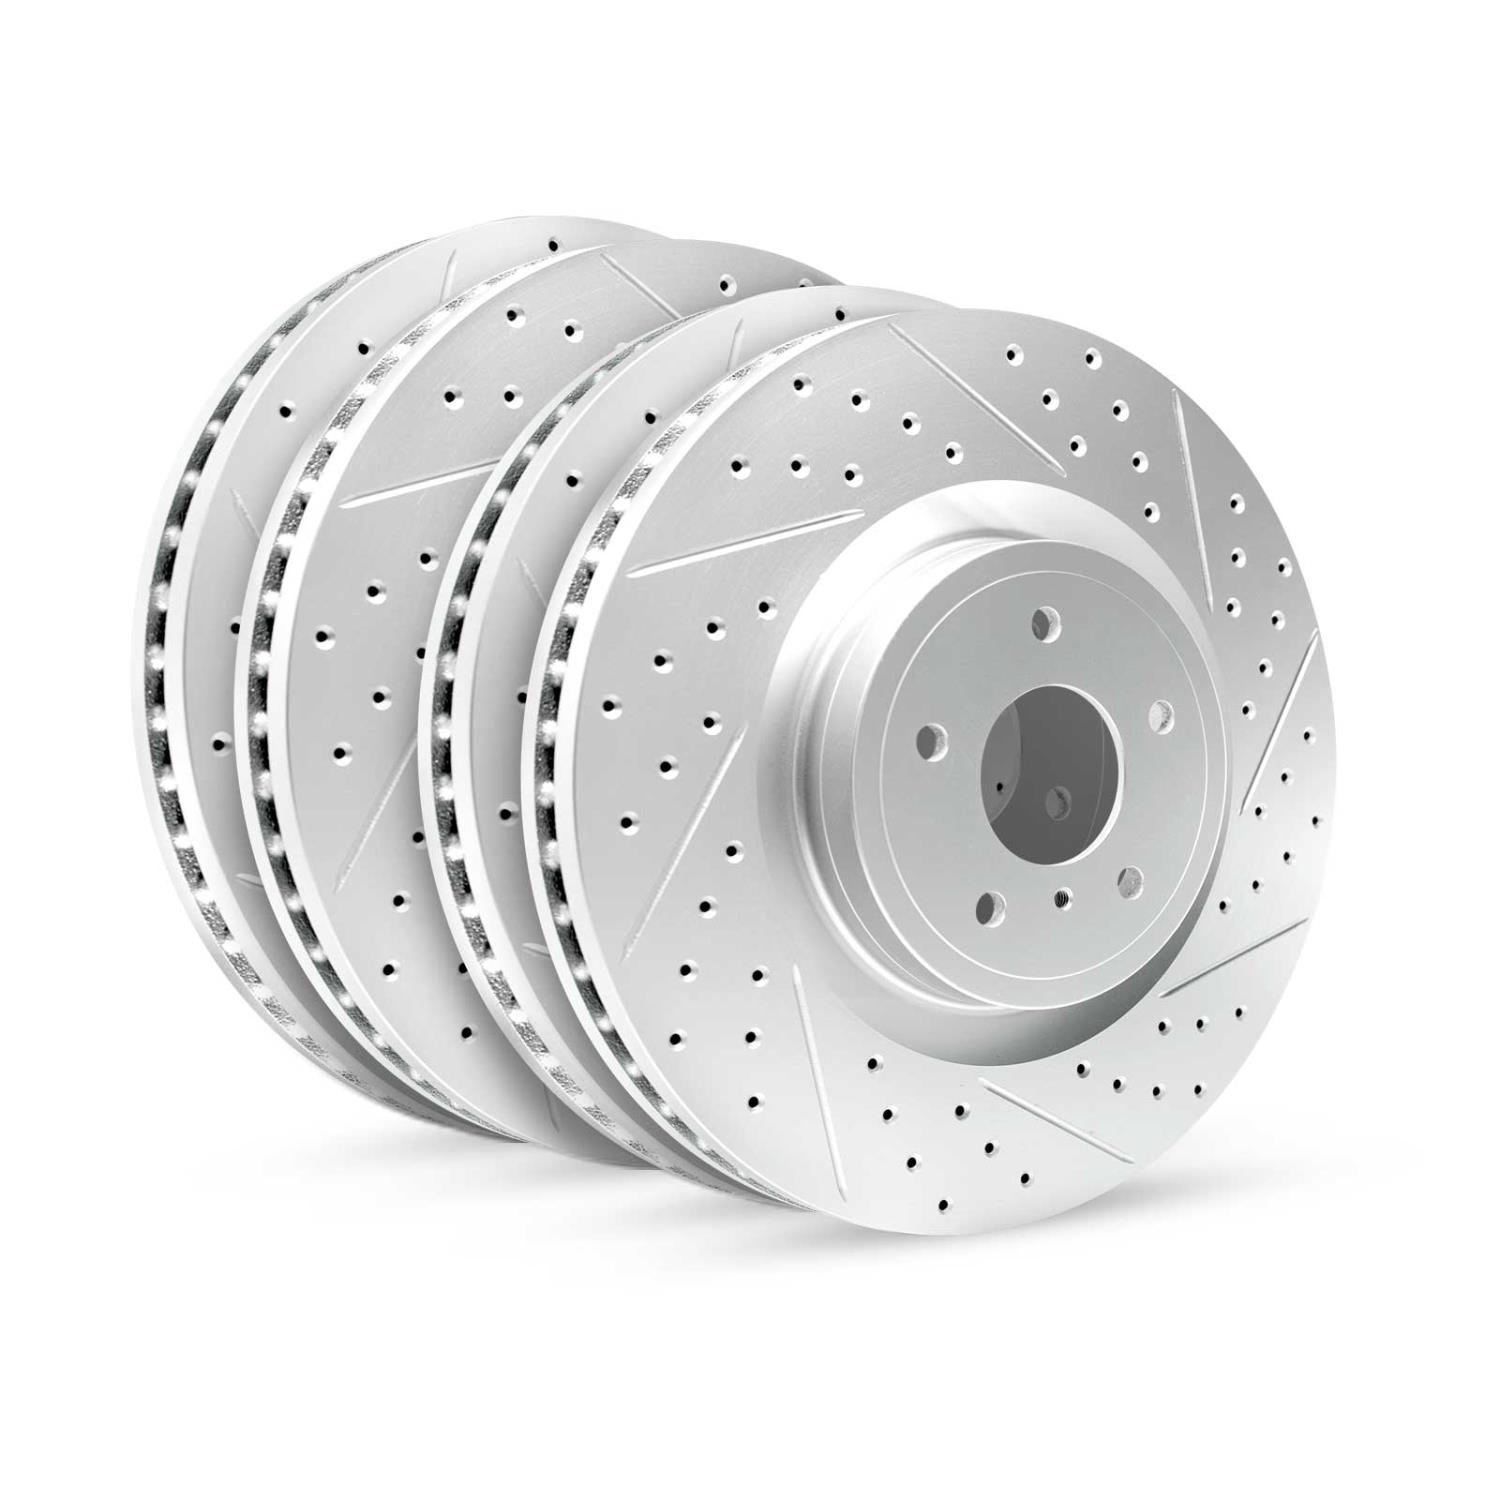 GEO-Carbon Drilled/Slotted Rotors, 2013-2018 Kia/Hyundai/Genesis, Position: Front/Rear